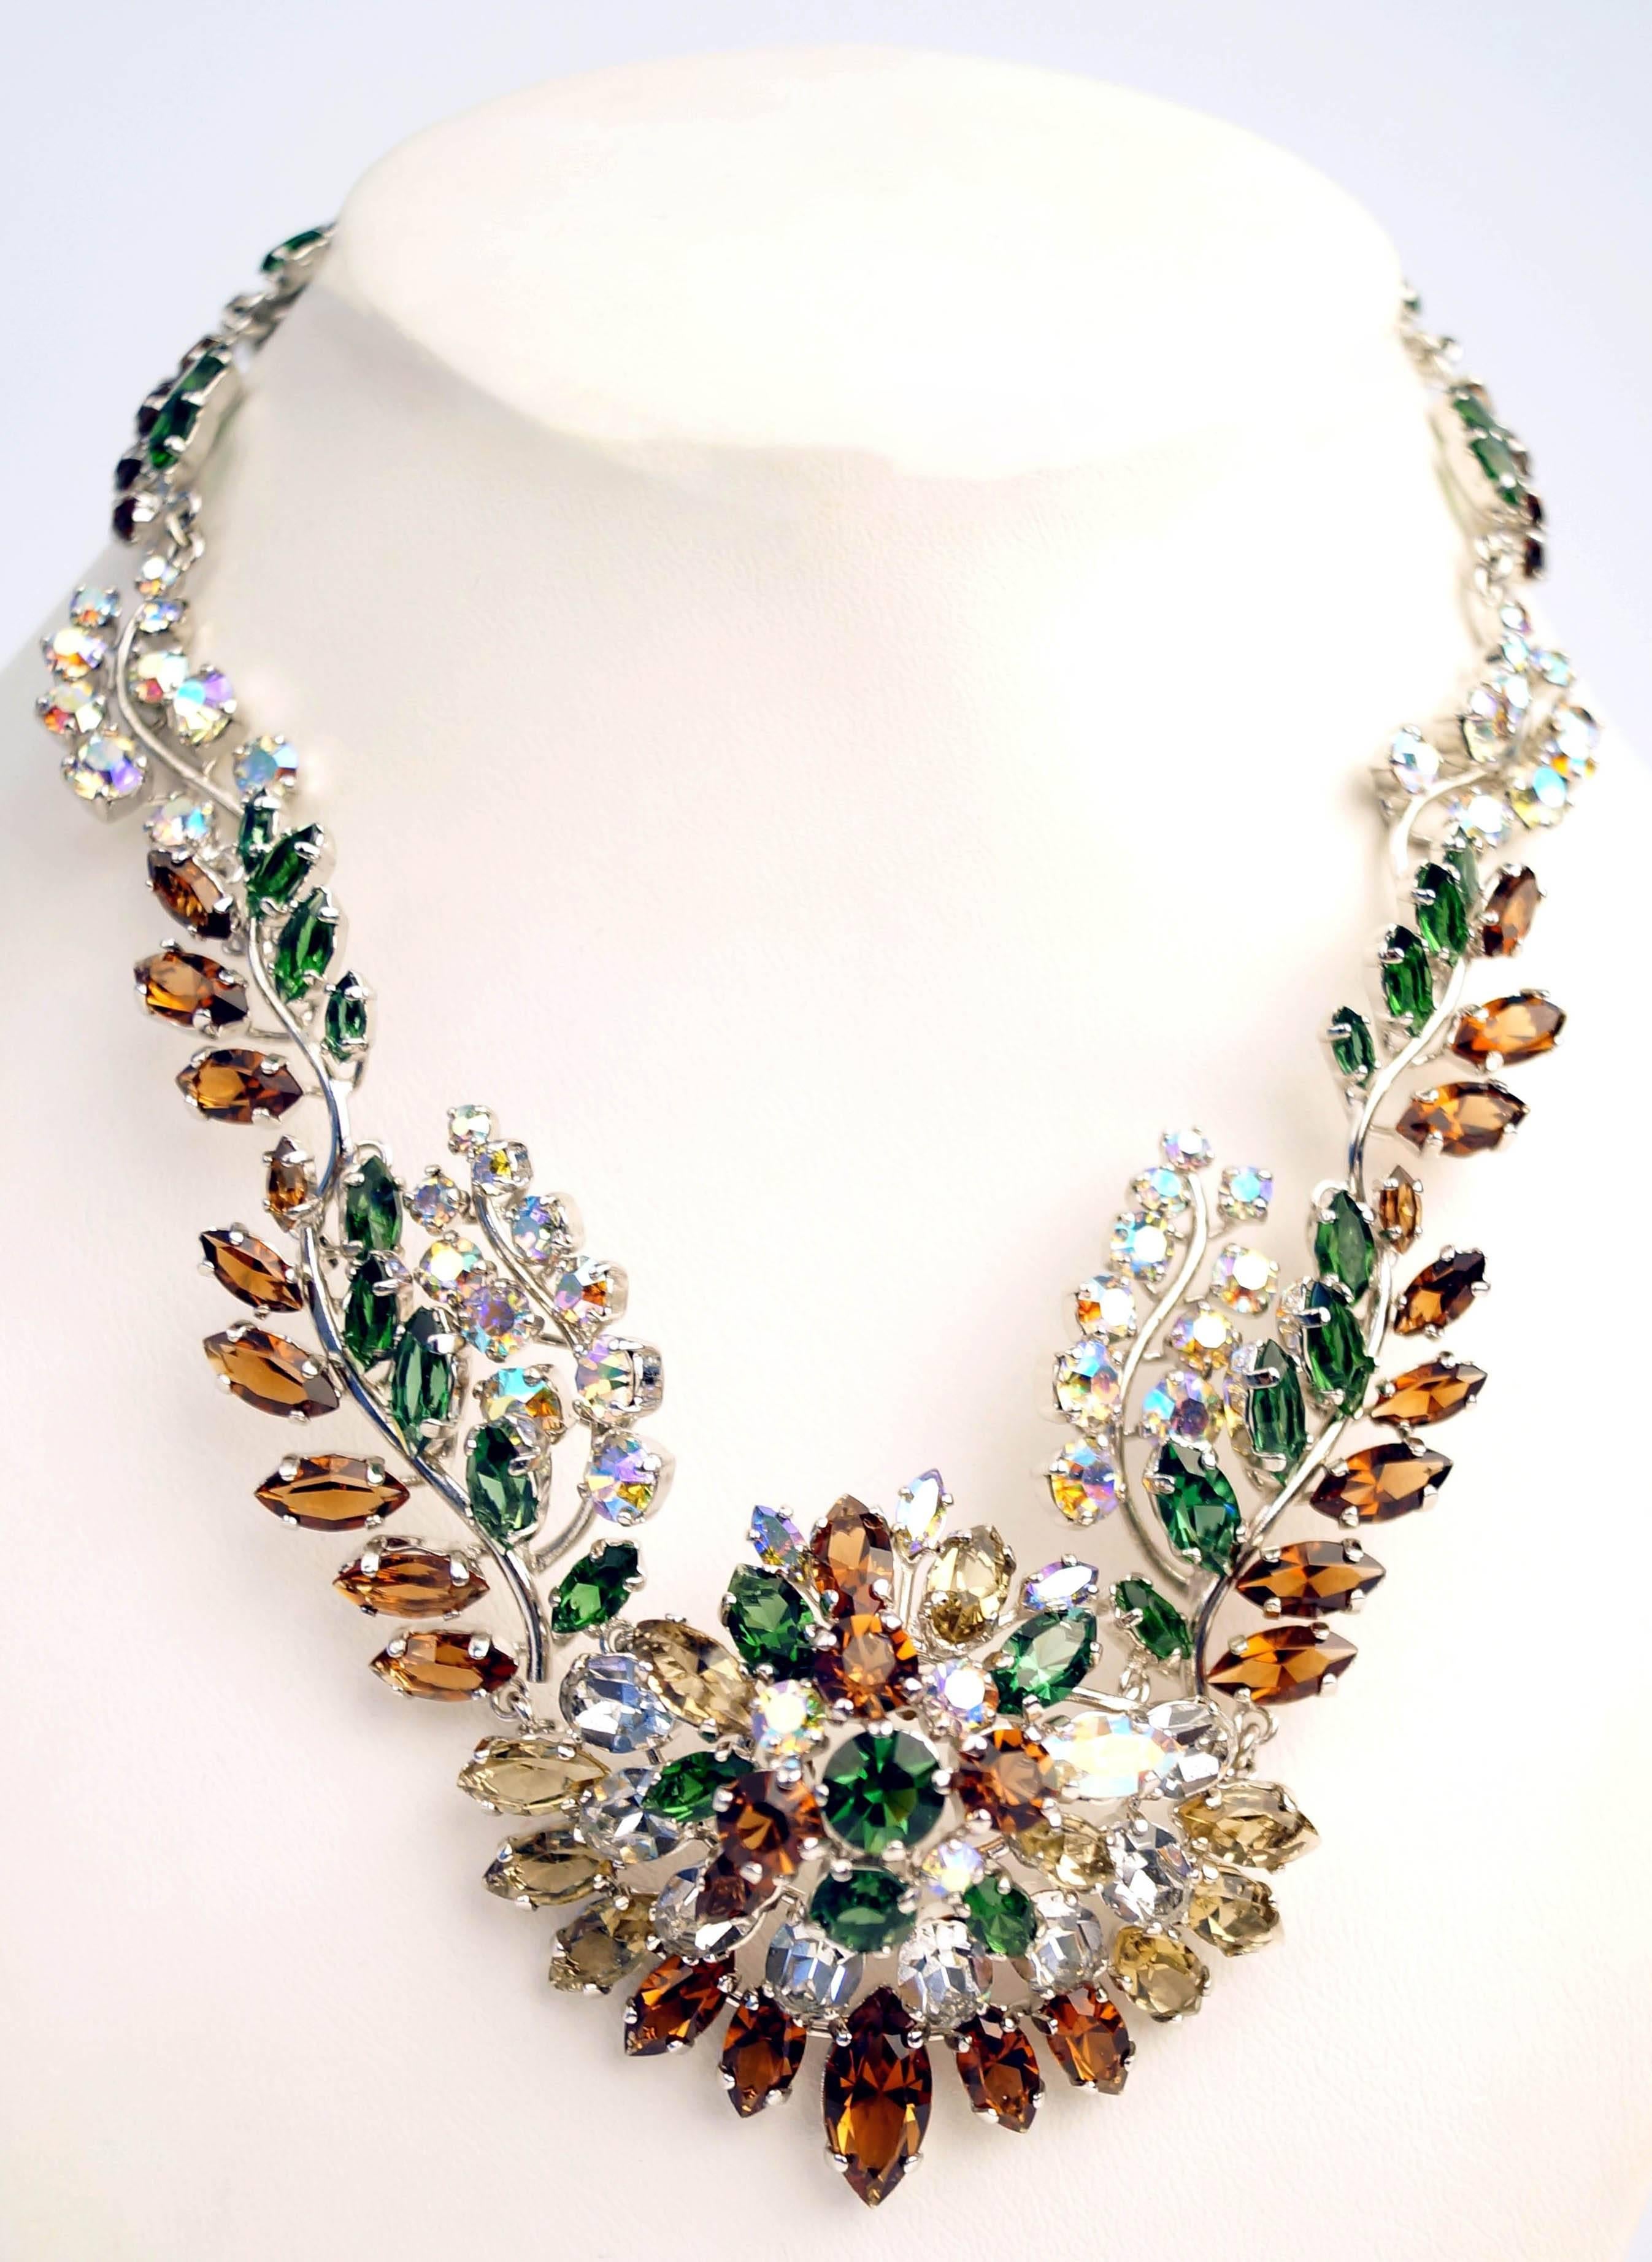 
This gorgeous necklace by Dior is composed of chocolate brown, green, and clear iridescent rhinestones in marquise and round multifaceted cuts. The necklace is on a silver-tone base with floral rhinestone arrangement. The necklace's purposefully